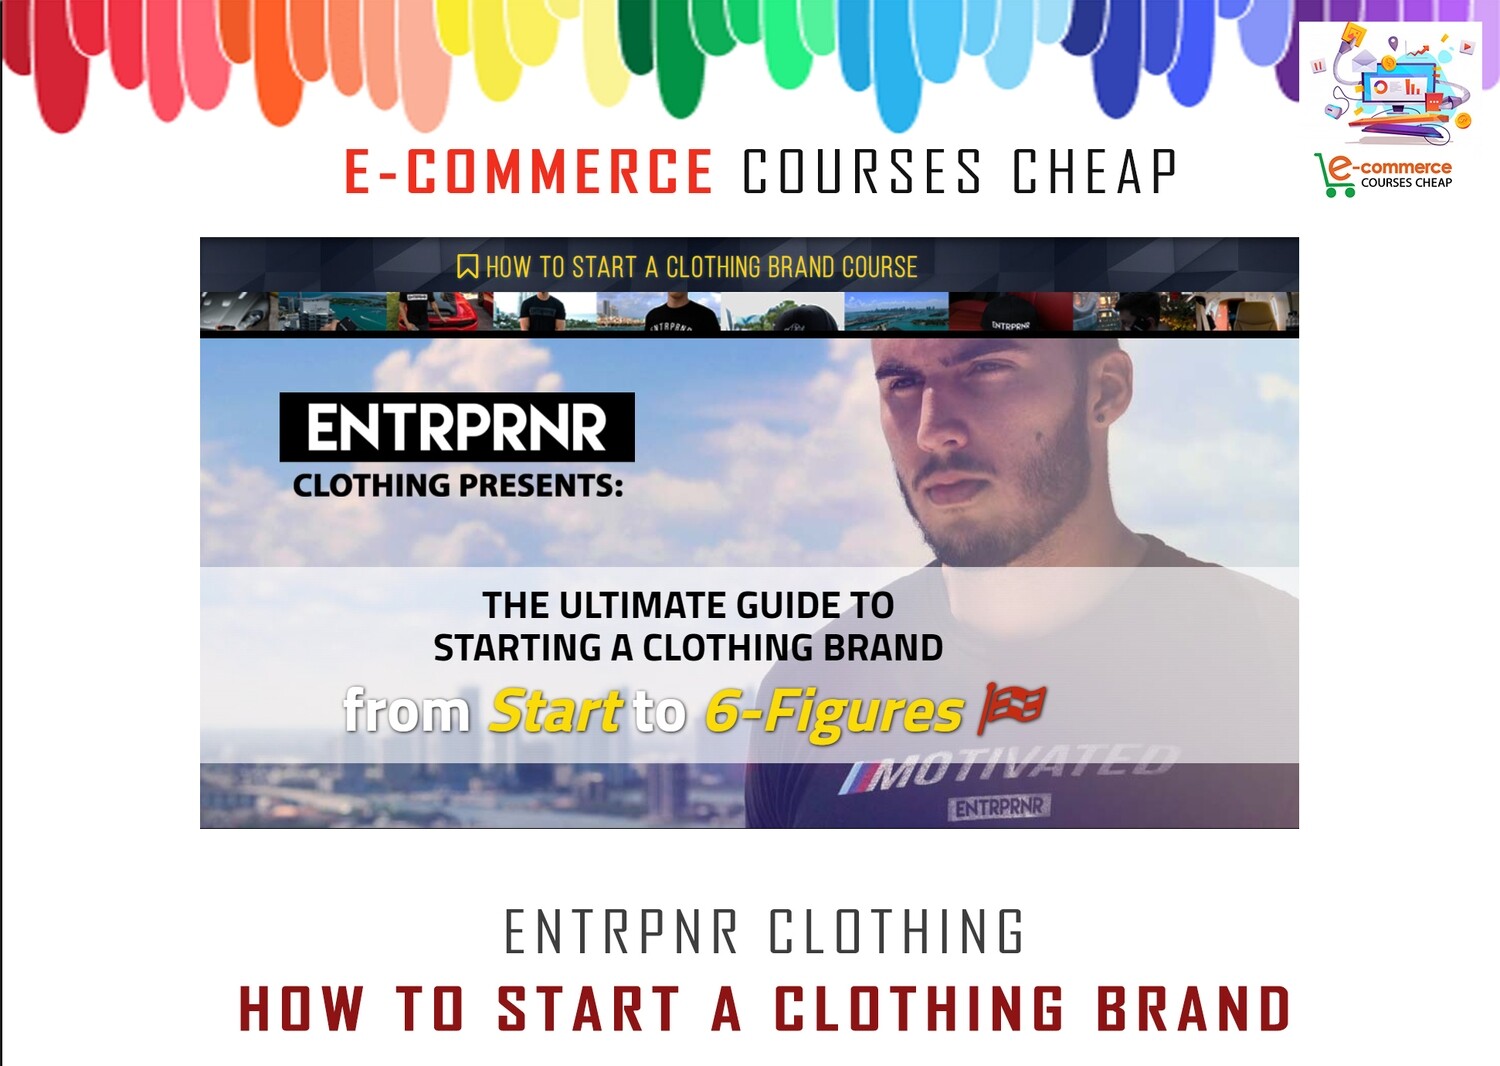 Entrpnr Clothing - How To Start A Clothing Brand